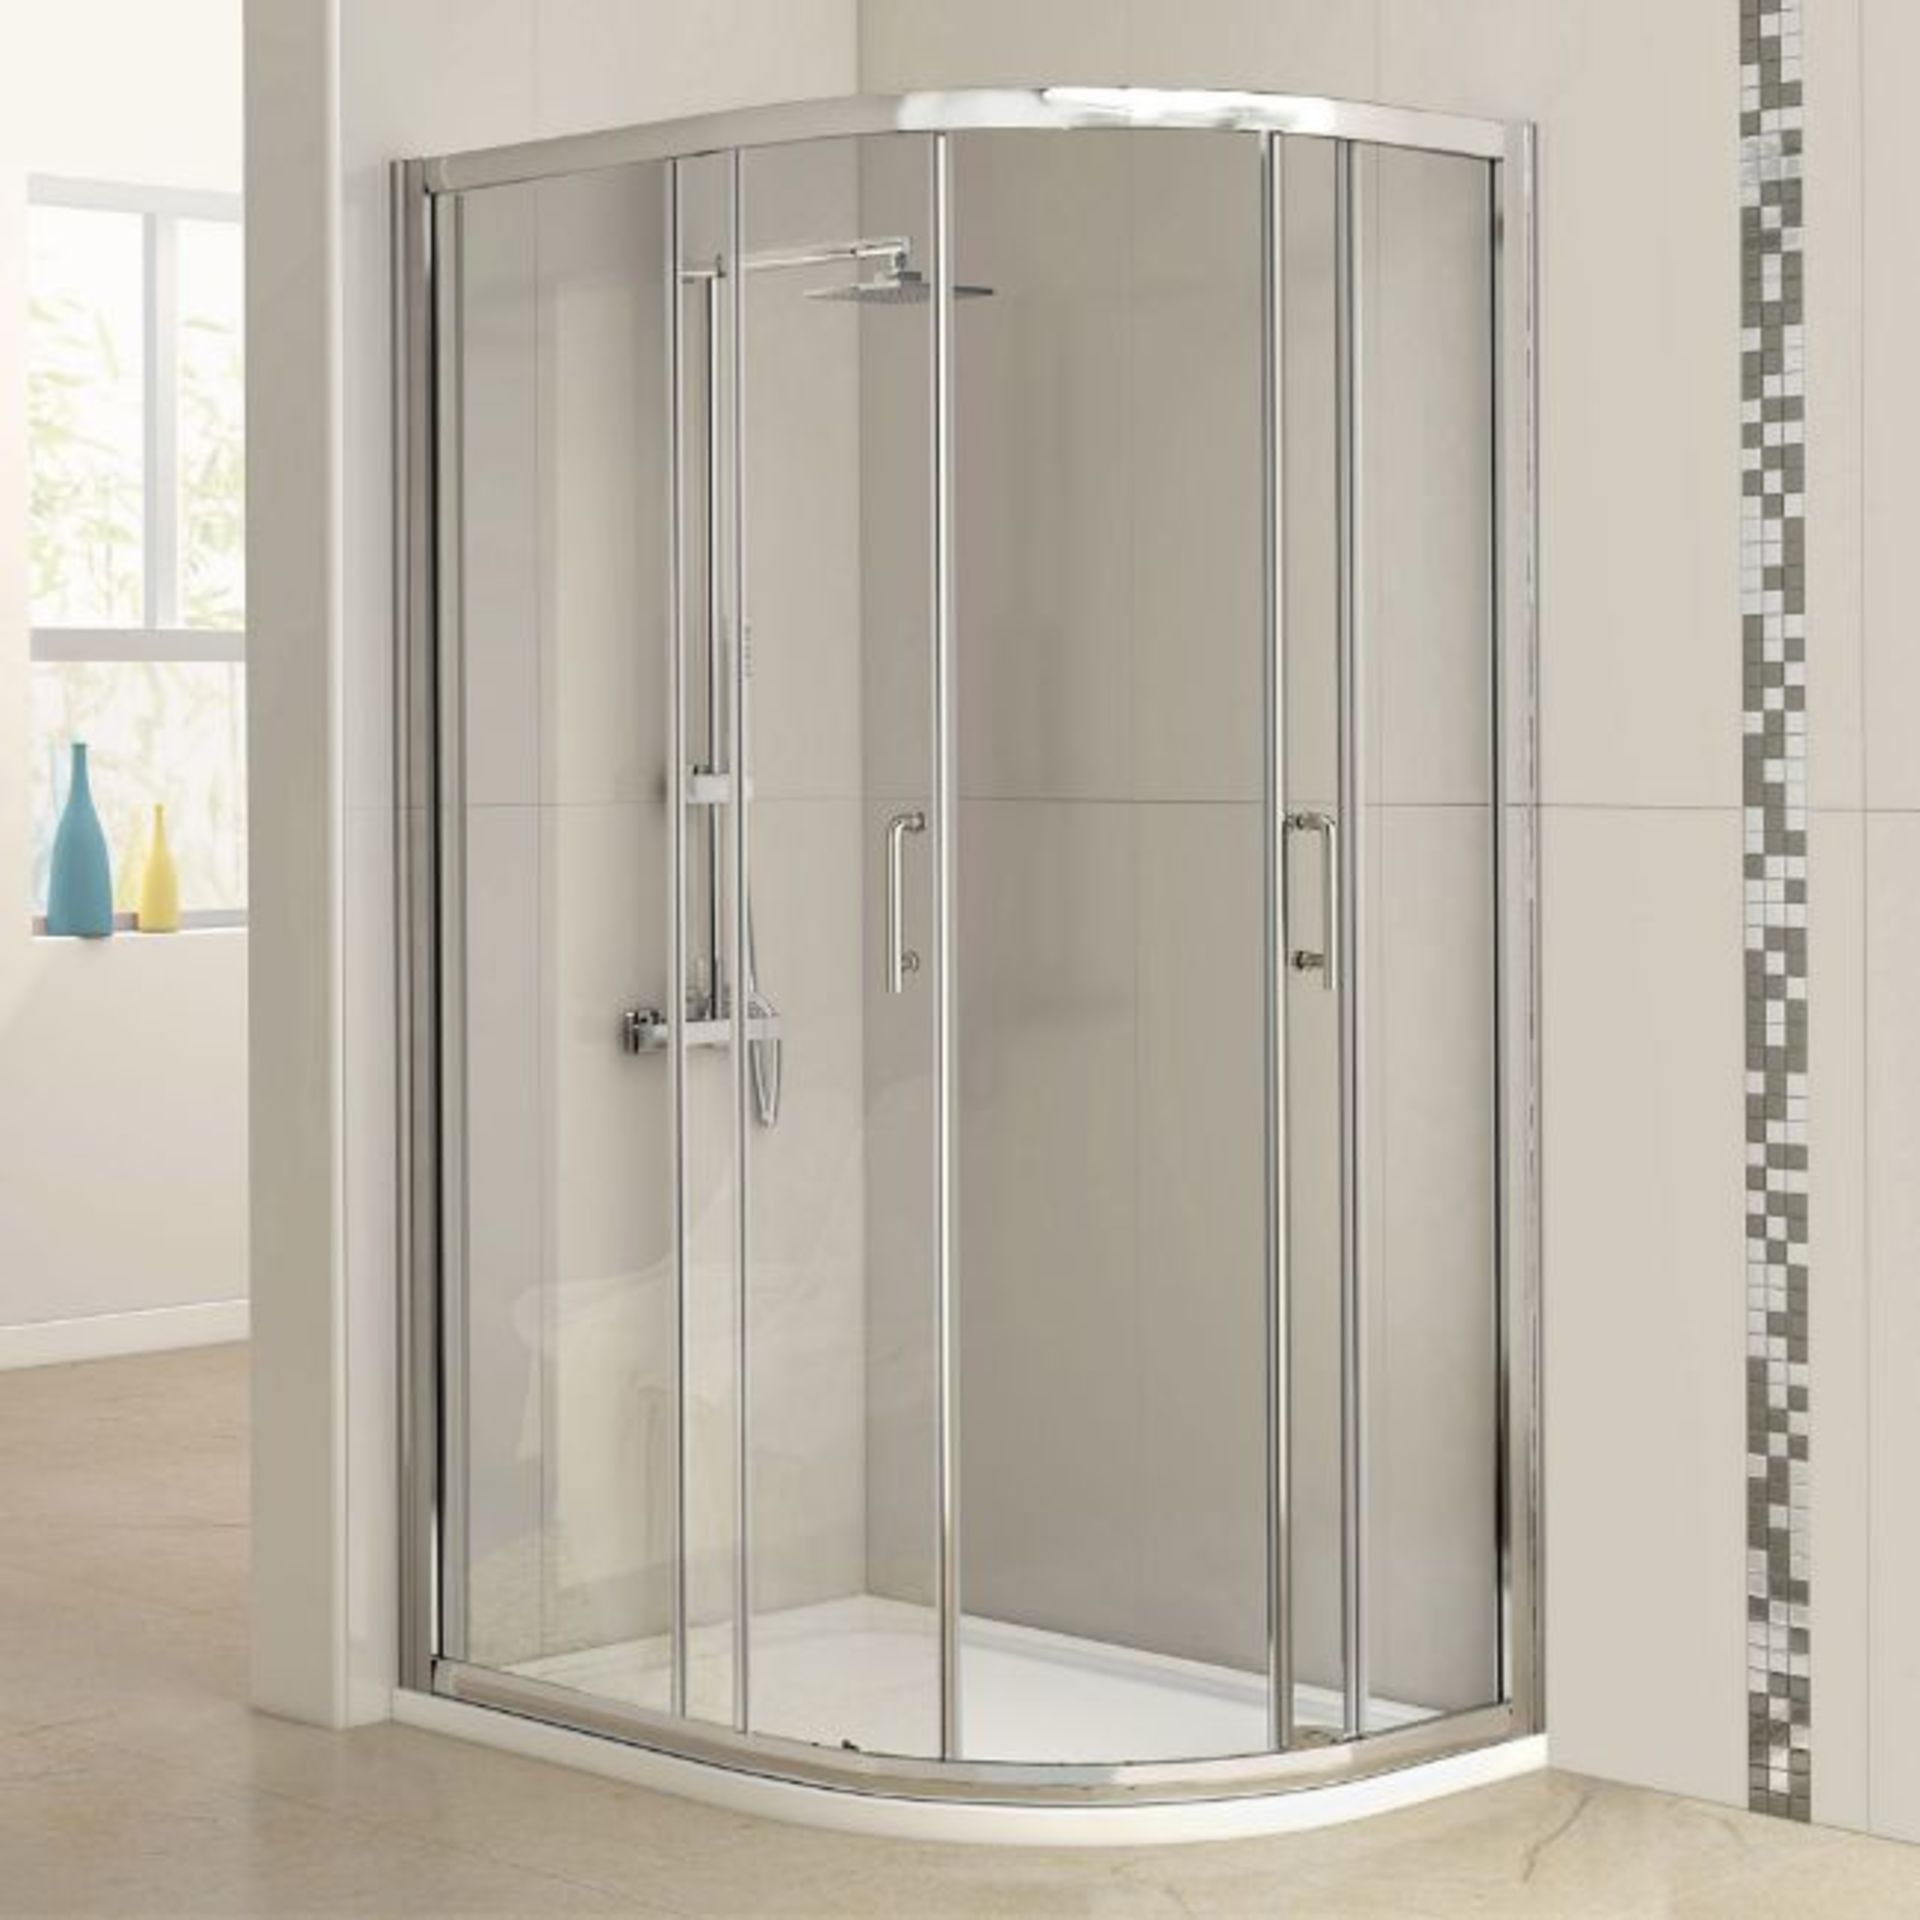 New (W77) 1200x900mm - 6mm - 2 Door Offset Quadrant Shower Enclosure. RRP £599.99.Make The Mo... - Image 3 of 3